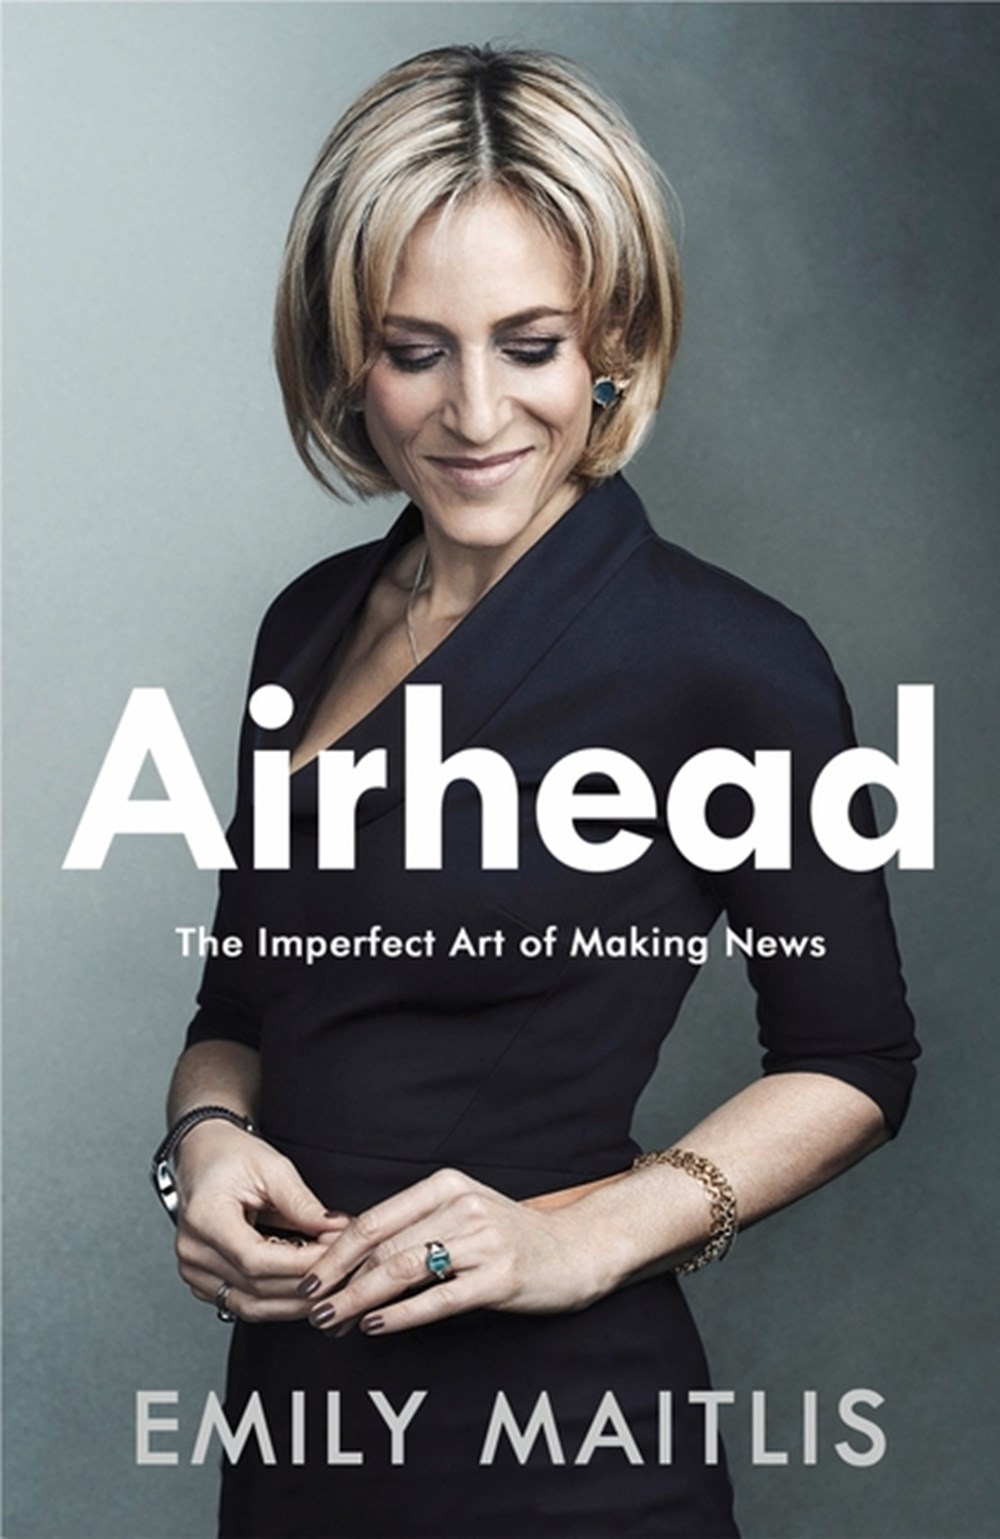 Airhead The Imperfect Art of Making News